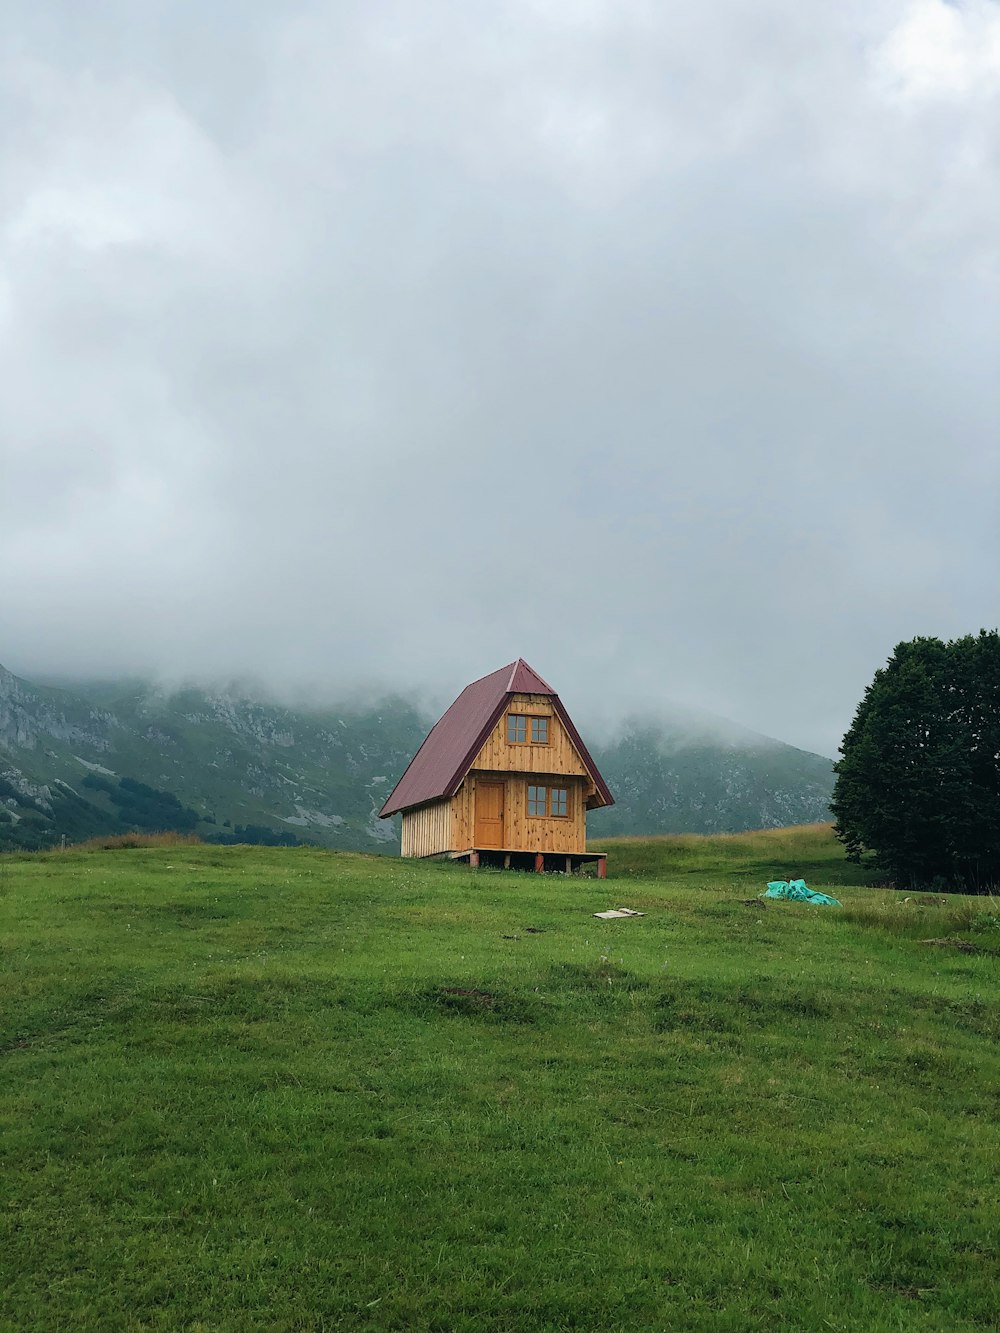 brown wooden house on green grass field near green mountains under white clouds during daytime